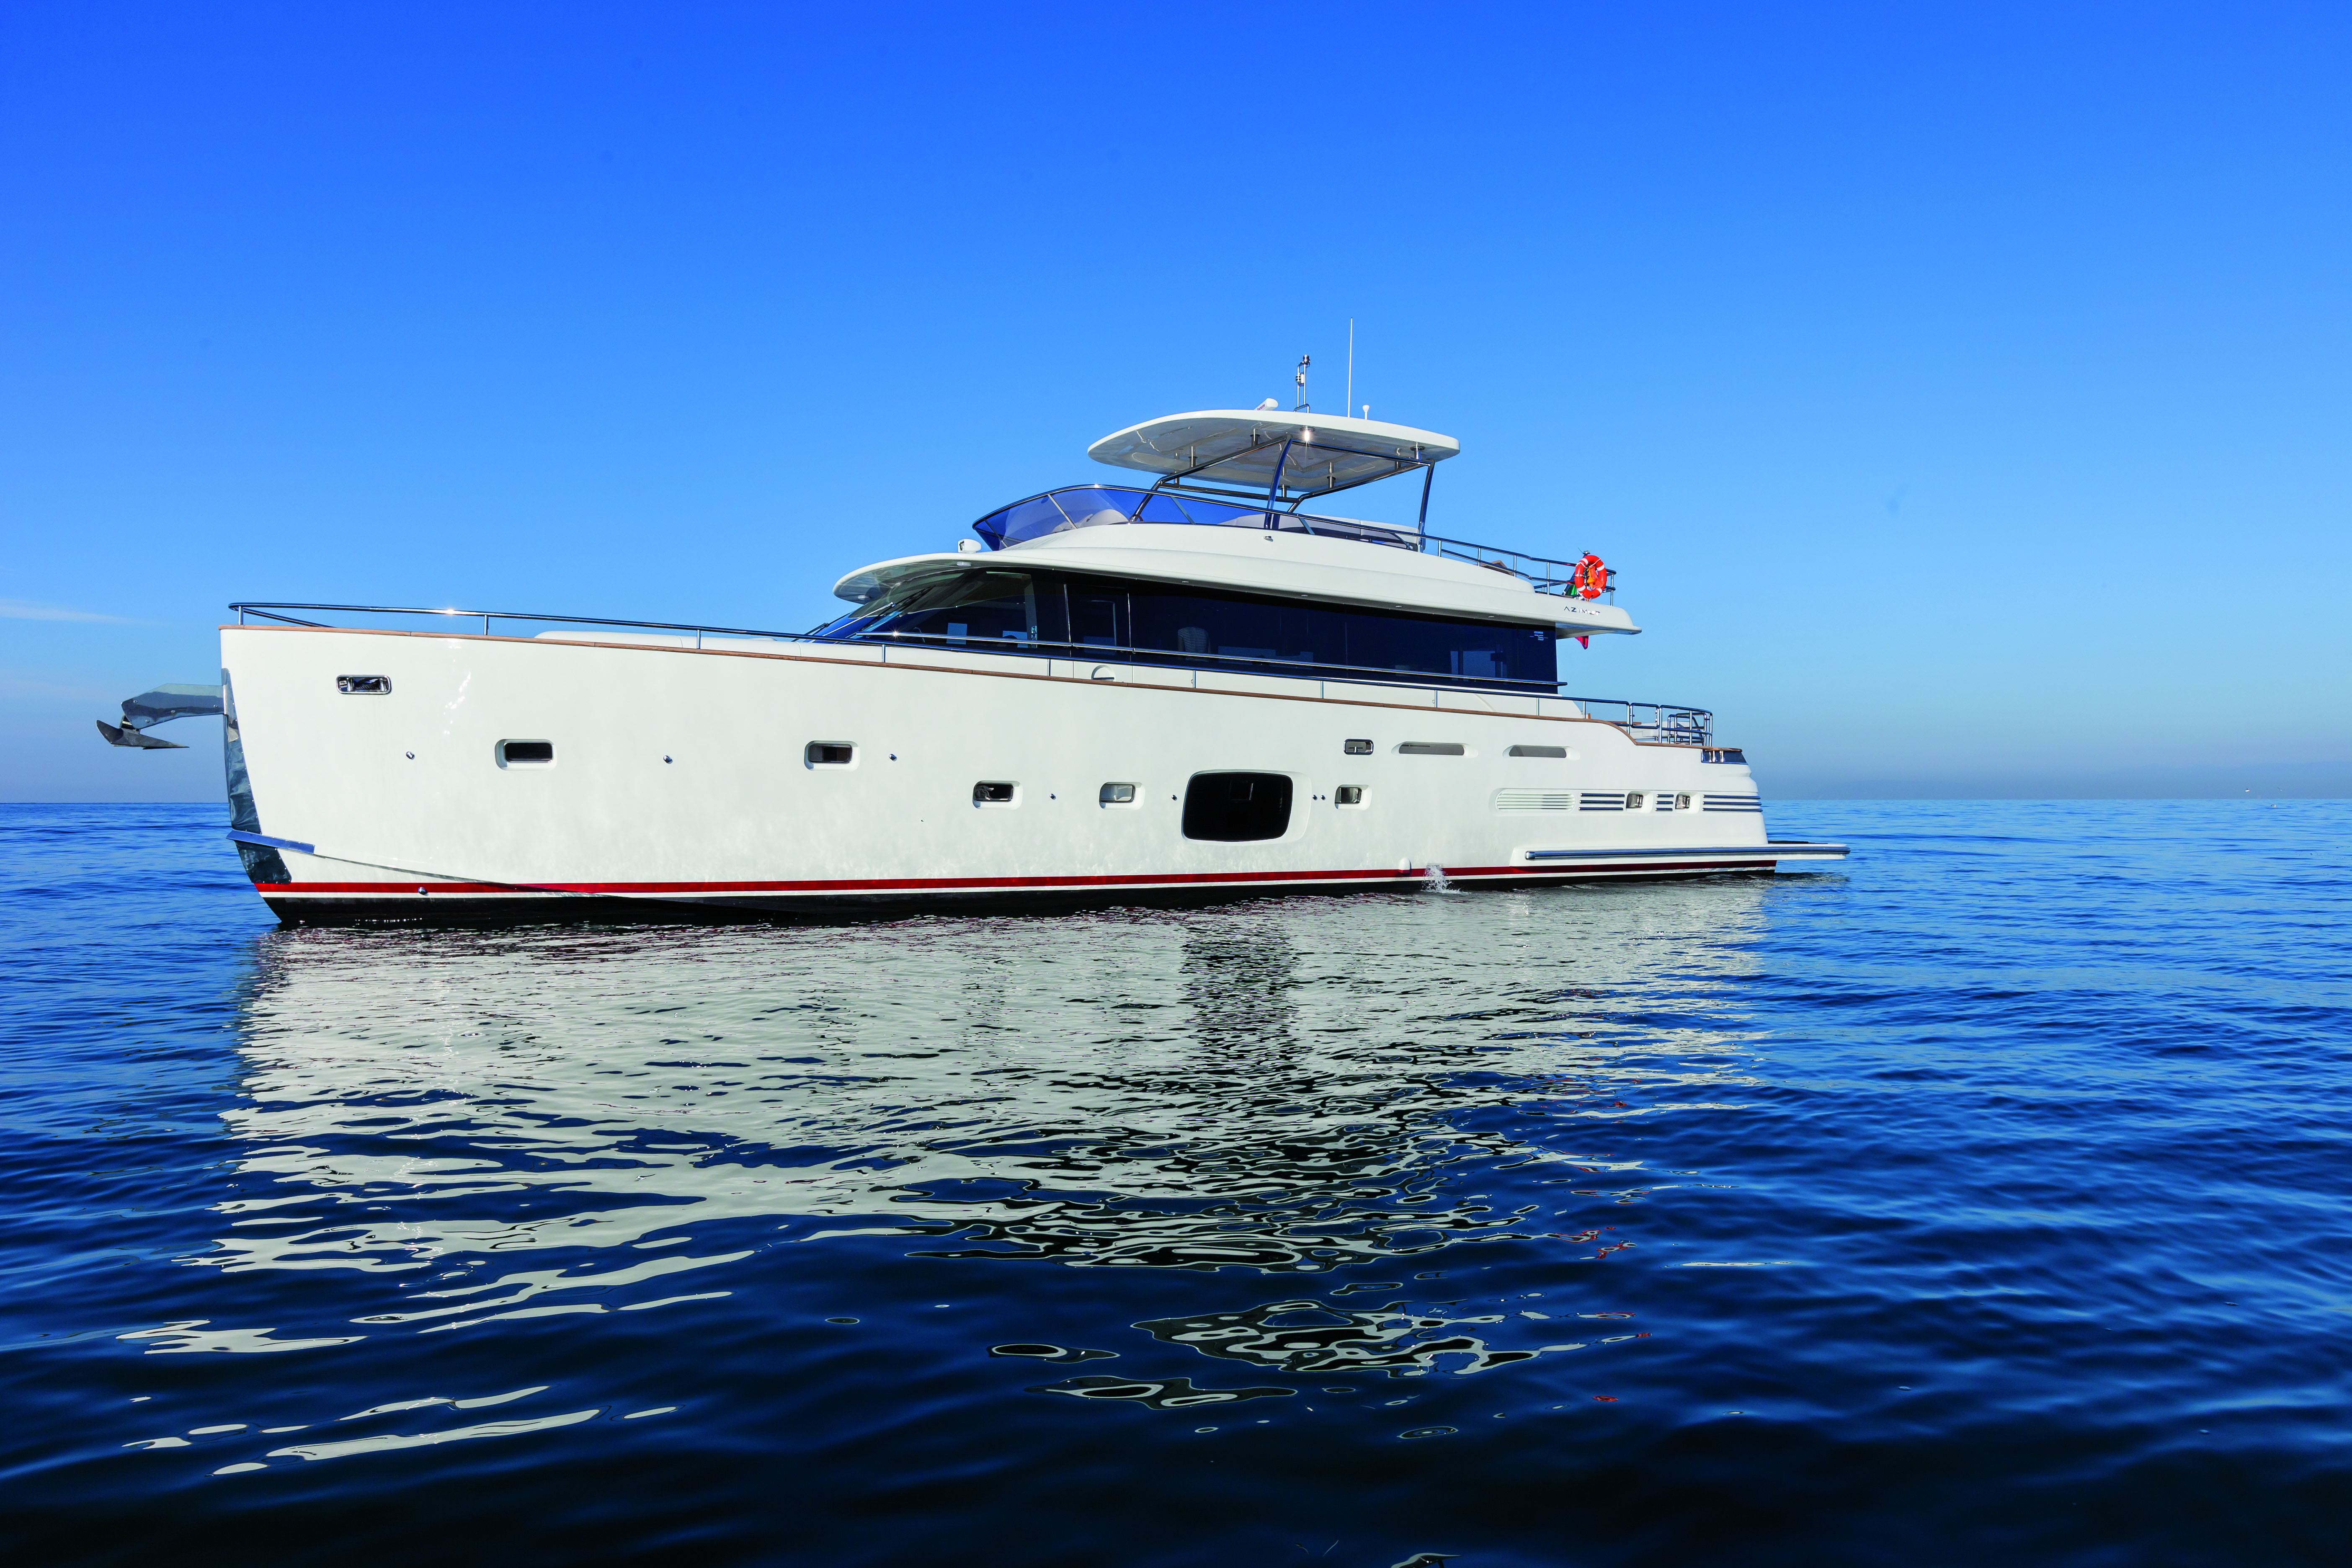 Azimut magellano trawler boat out at sea traveling to a destination